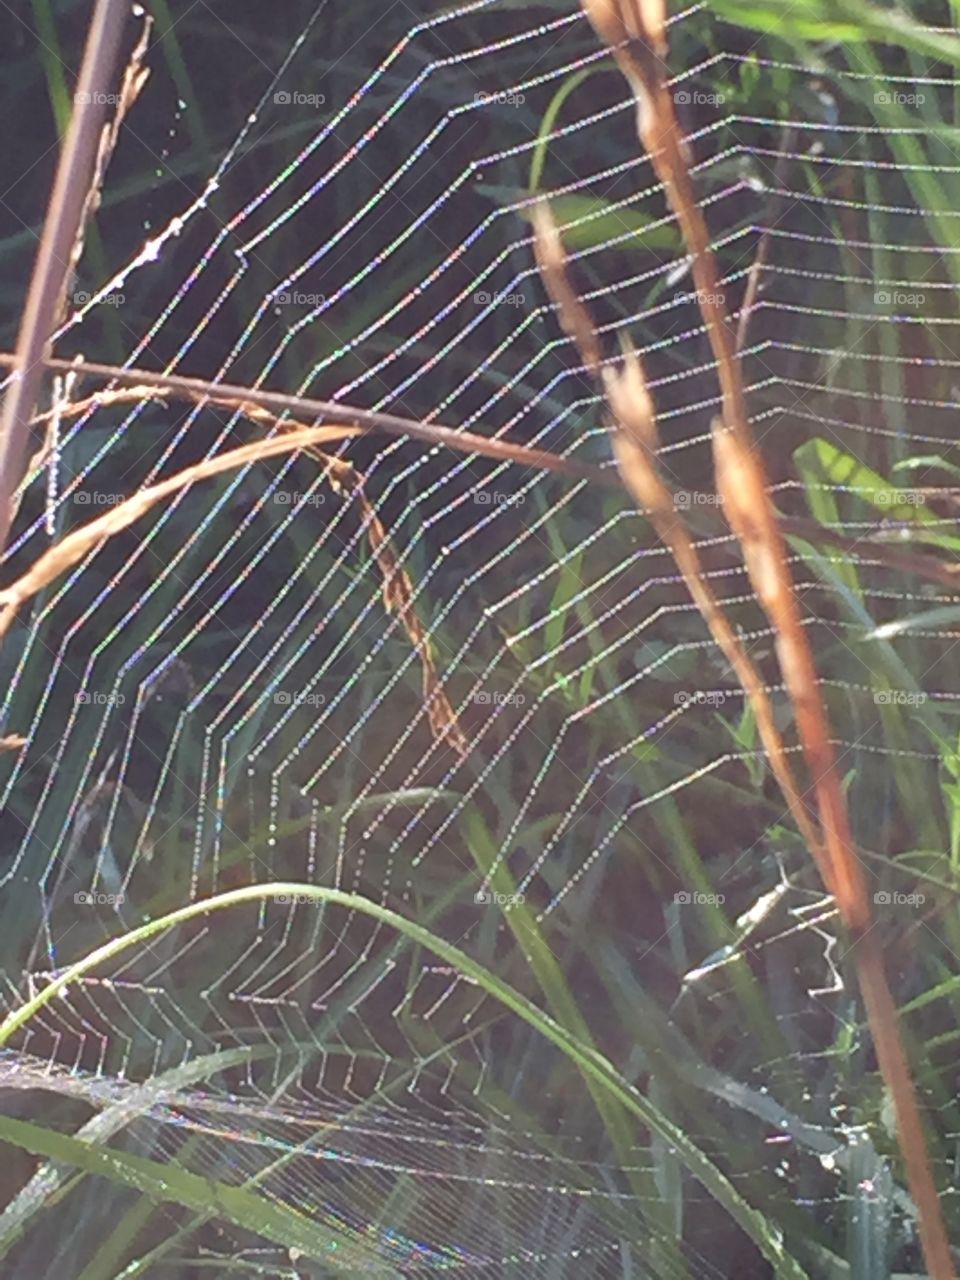 Dew Drops on Spider Web